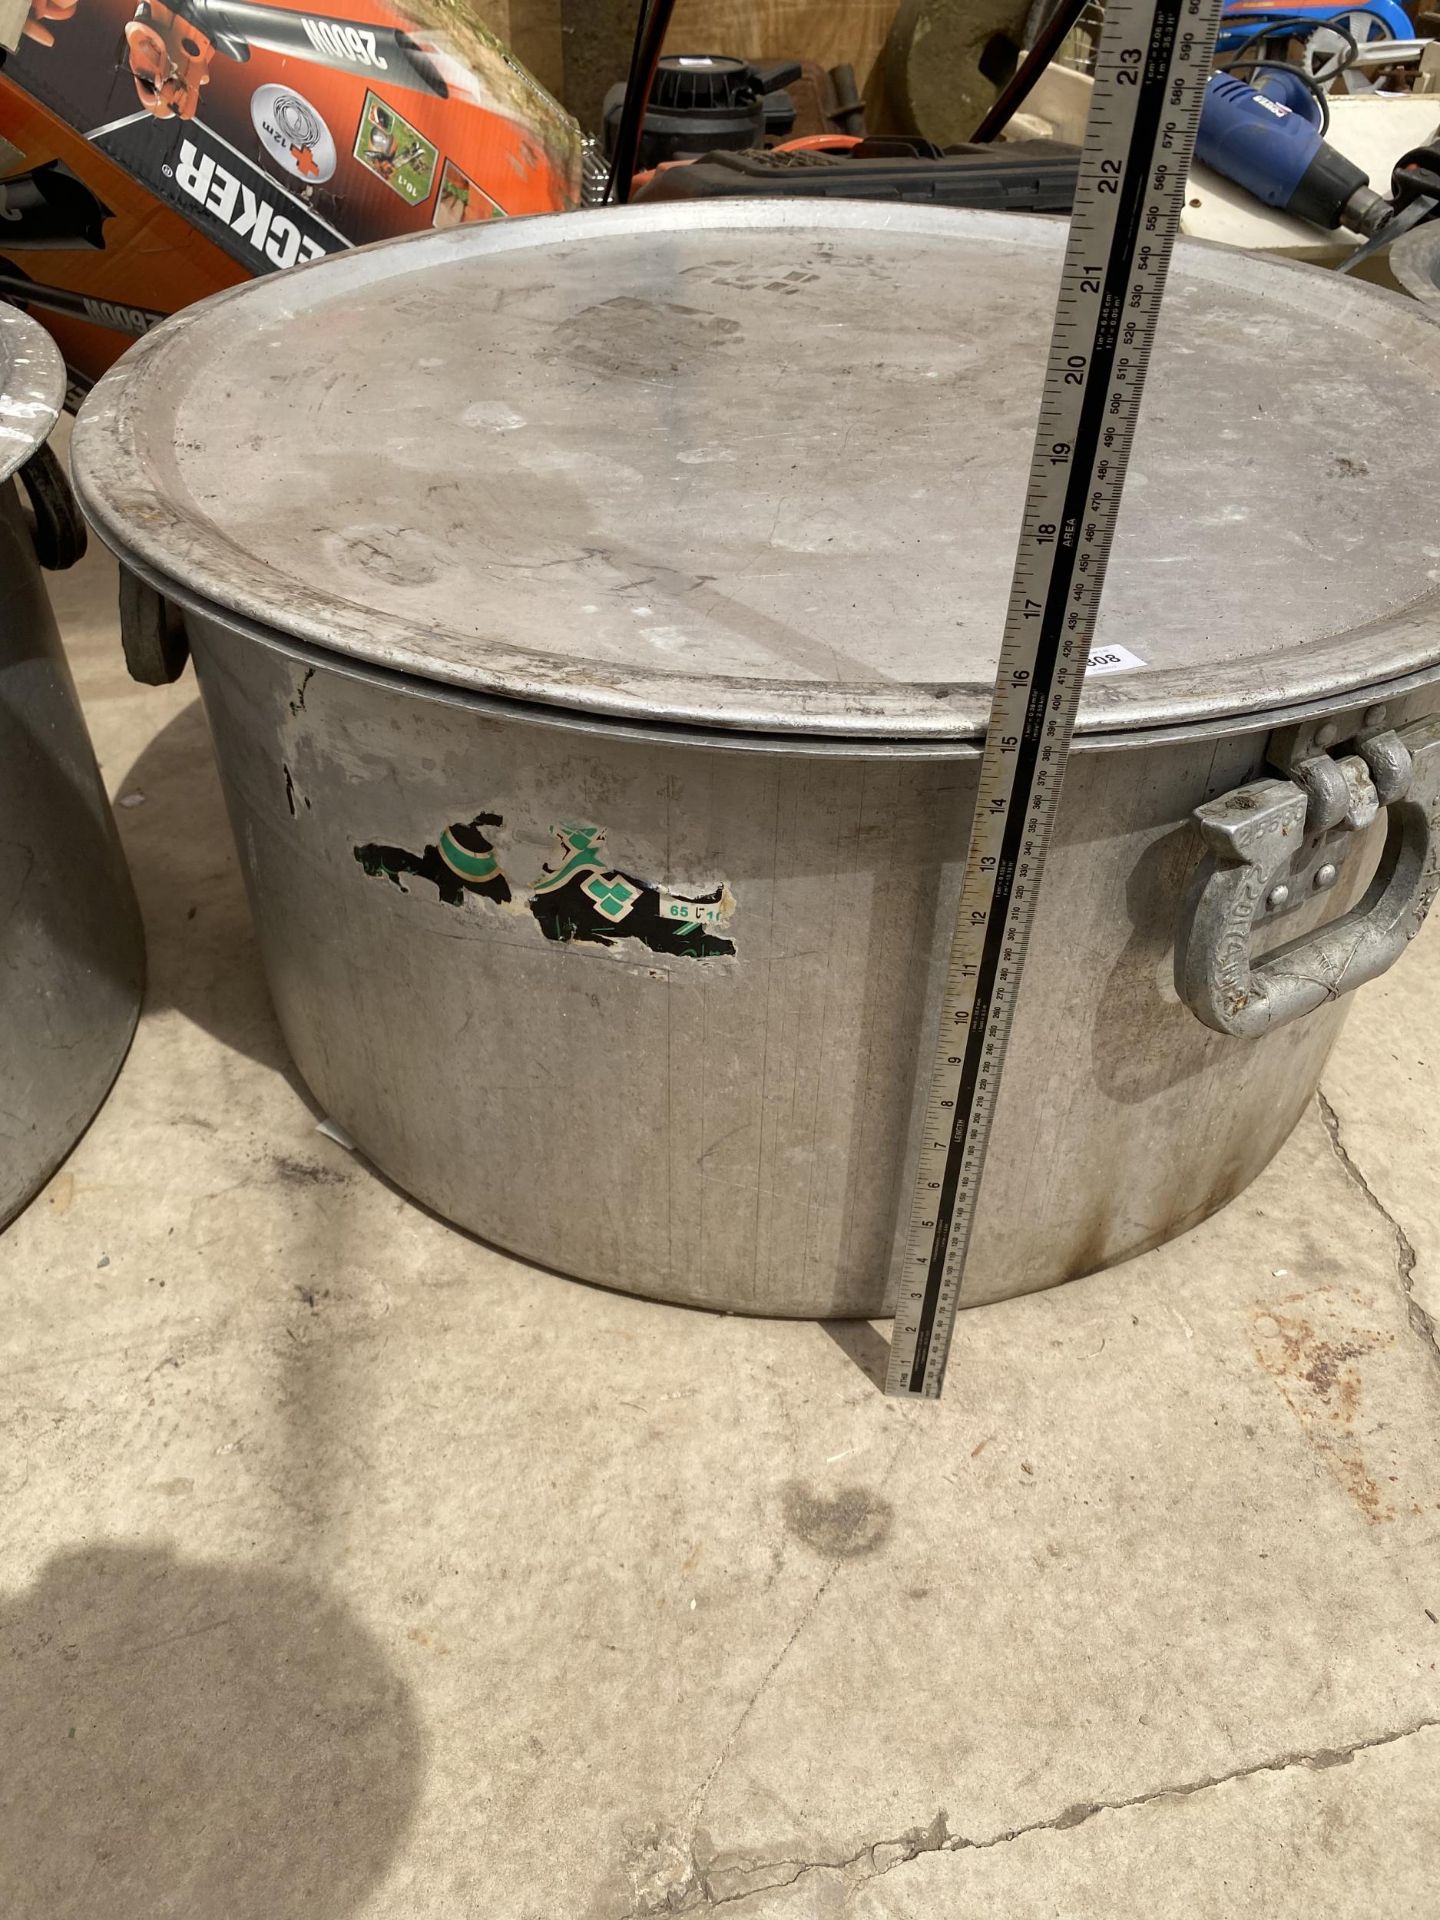 A VERY LARGE STAINLESS STEEL COOKING POT WITH LID - Image 3 of 3